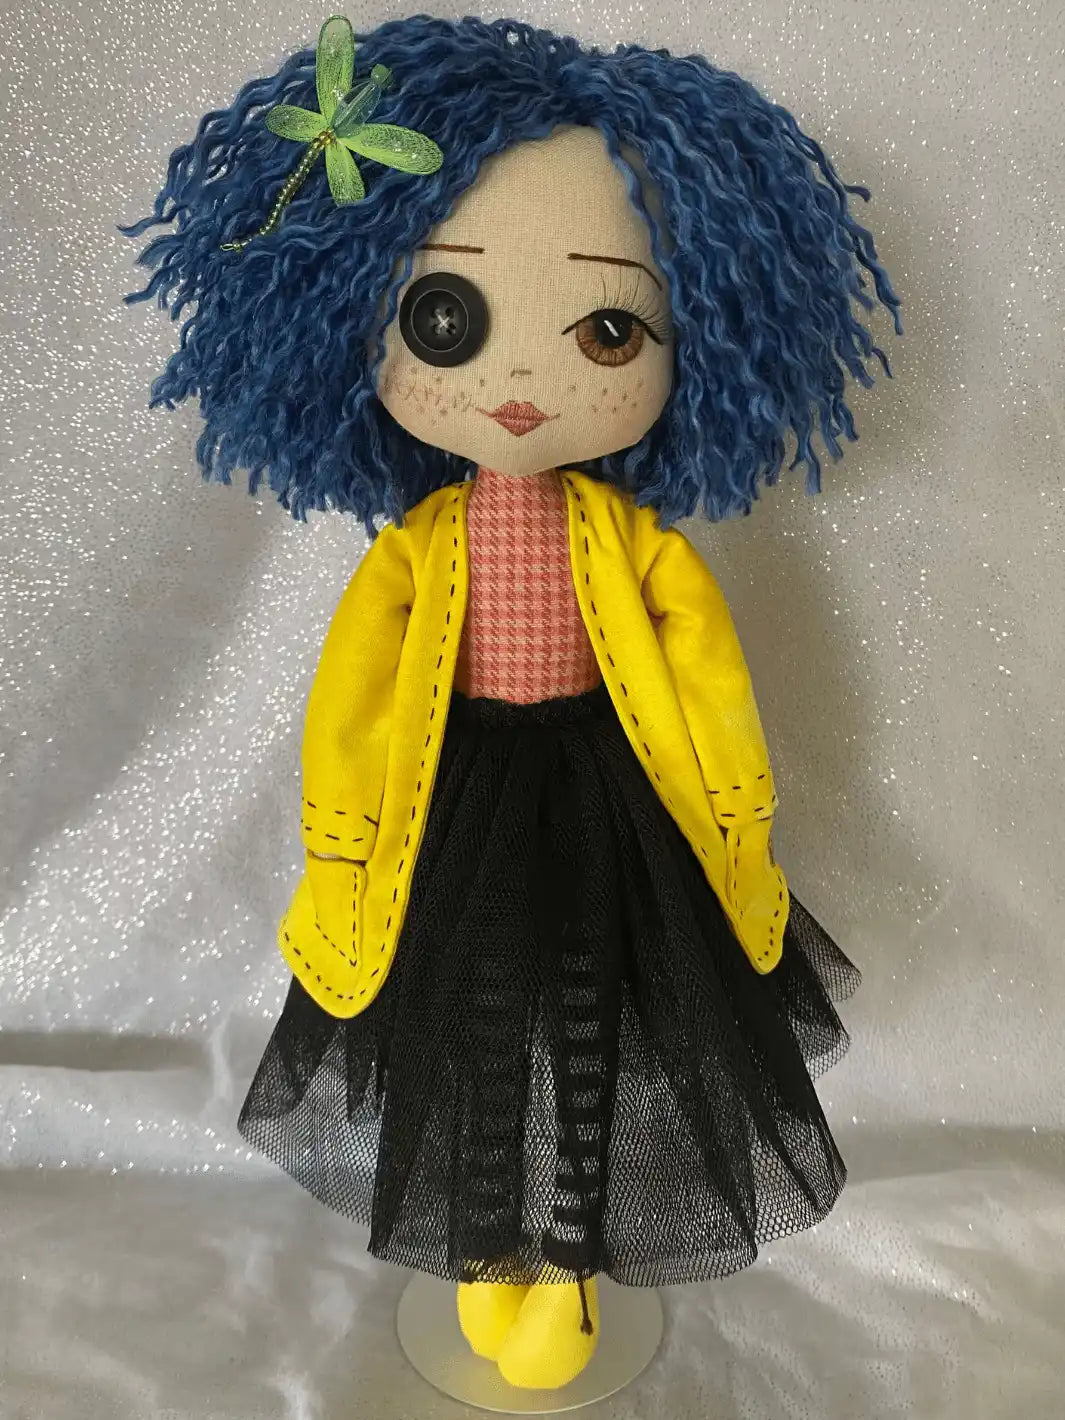 coraline handmade doll, blue hair, green dragonfly hairclip, one button eye, one hand embroidered brown eye, yellow jacket, red and orange shirt, black tulle skirt, black and white stripe tights and yellow boots